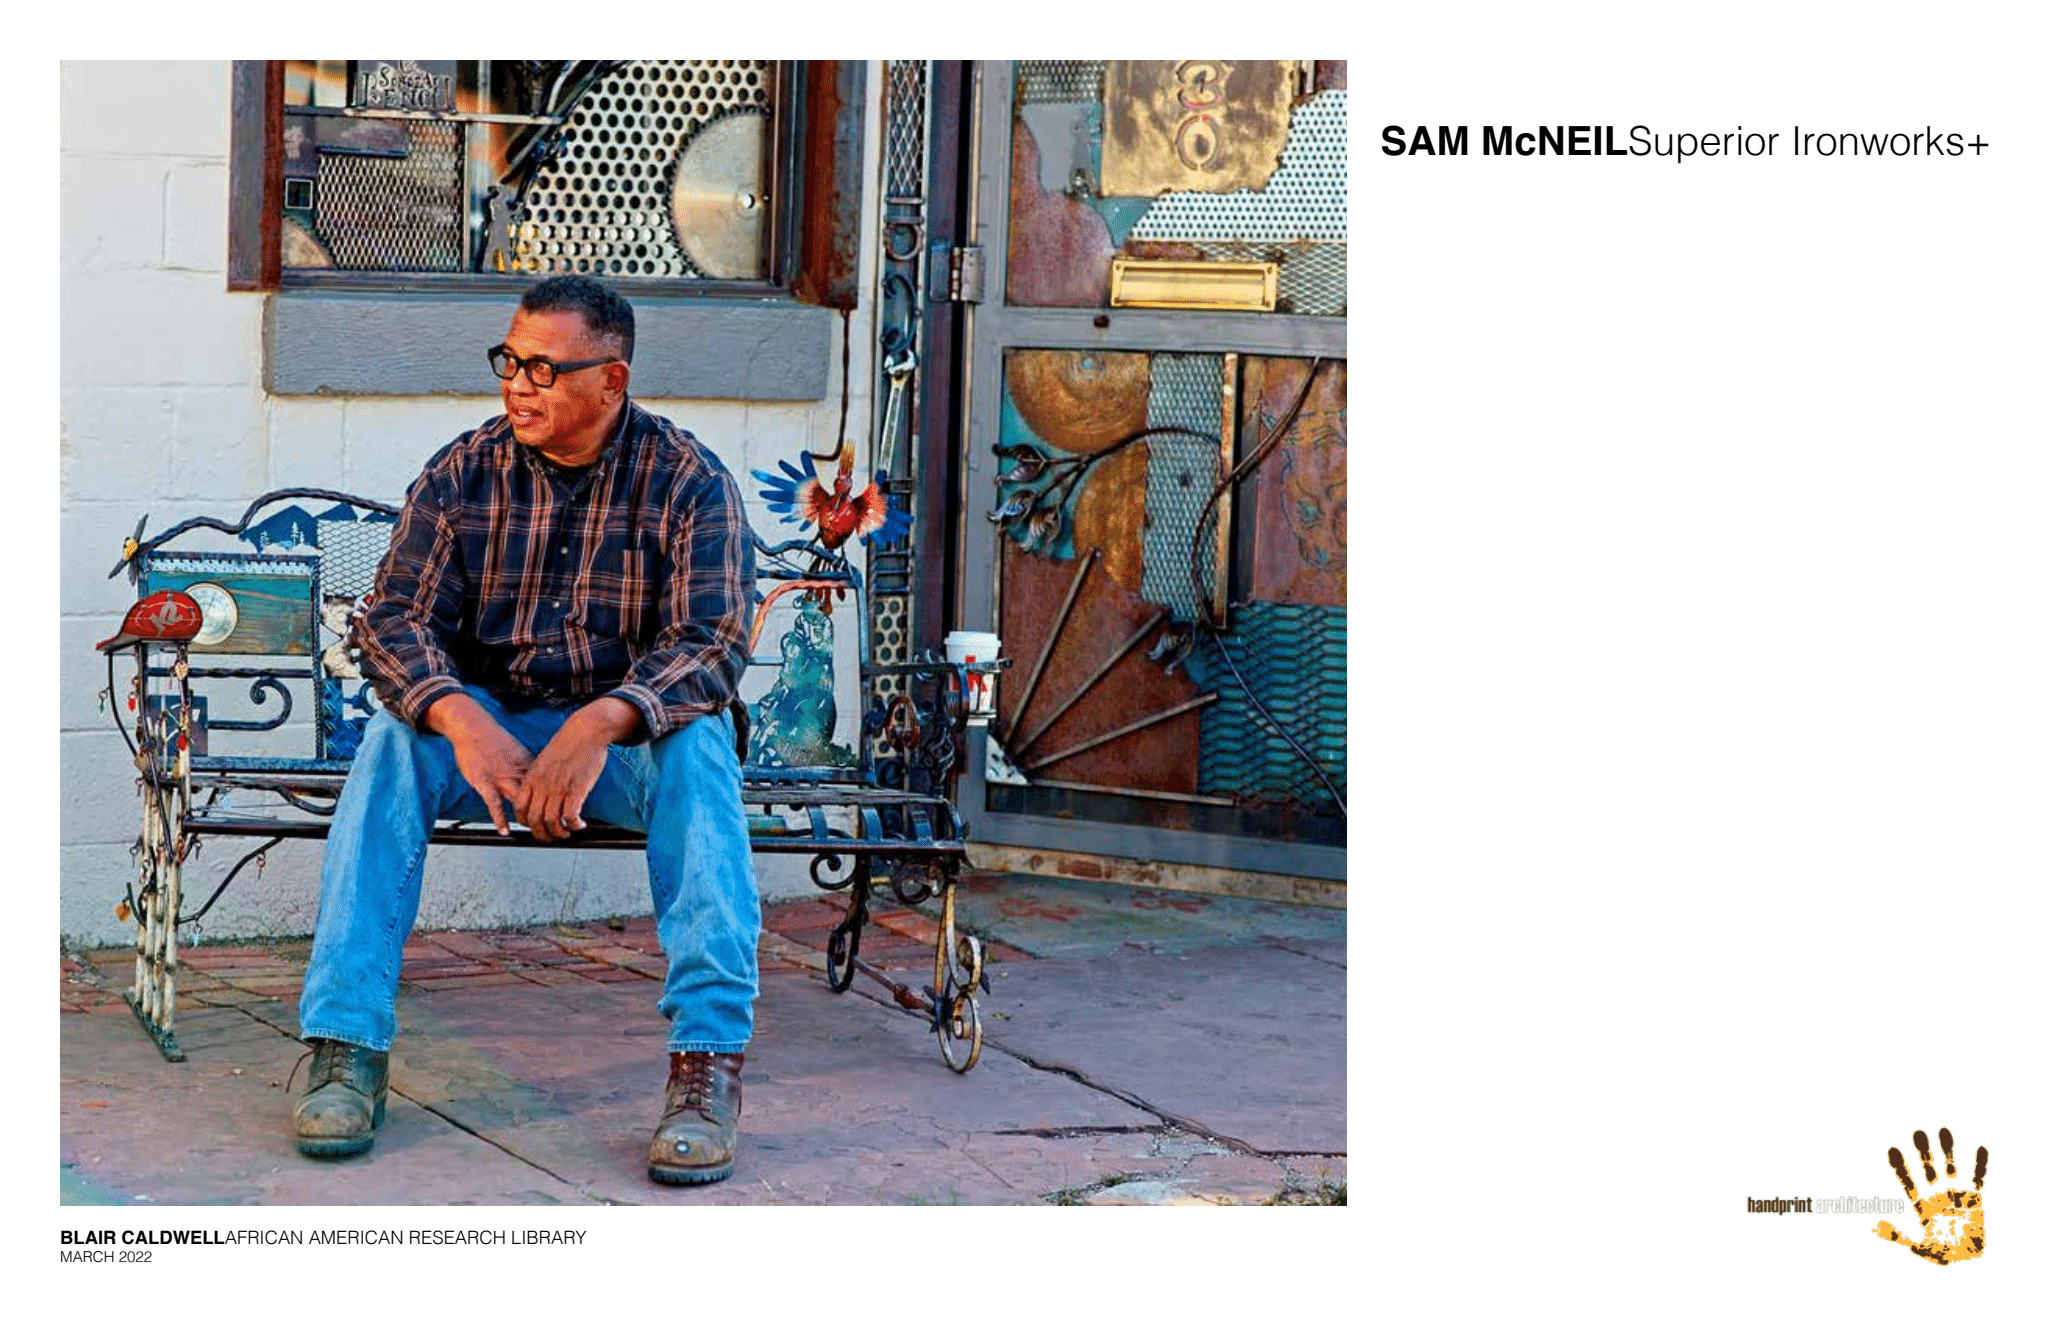 Photograph of artist Sam McNeil sitting on stairs on exterior of brick building.